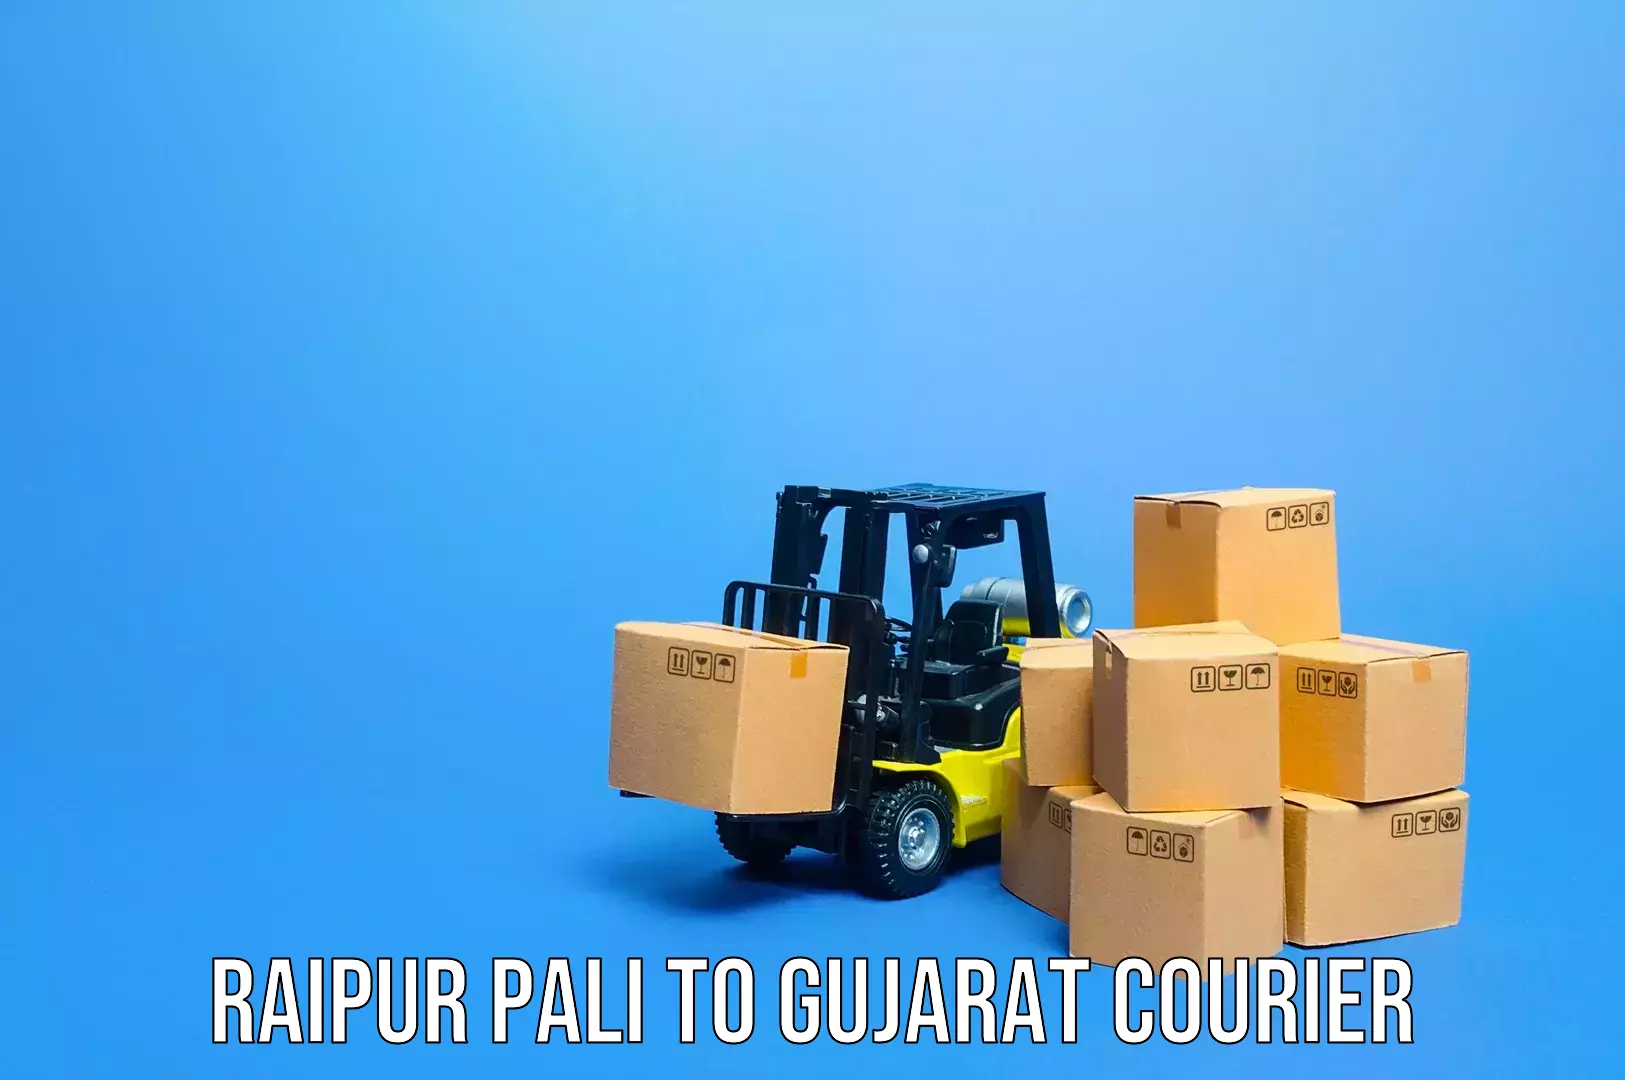 Overnight luggage courier Raipur Pali to Ahmedabad